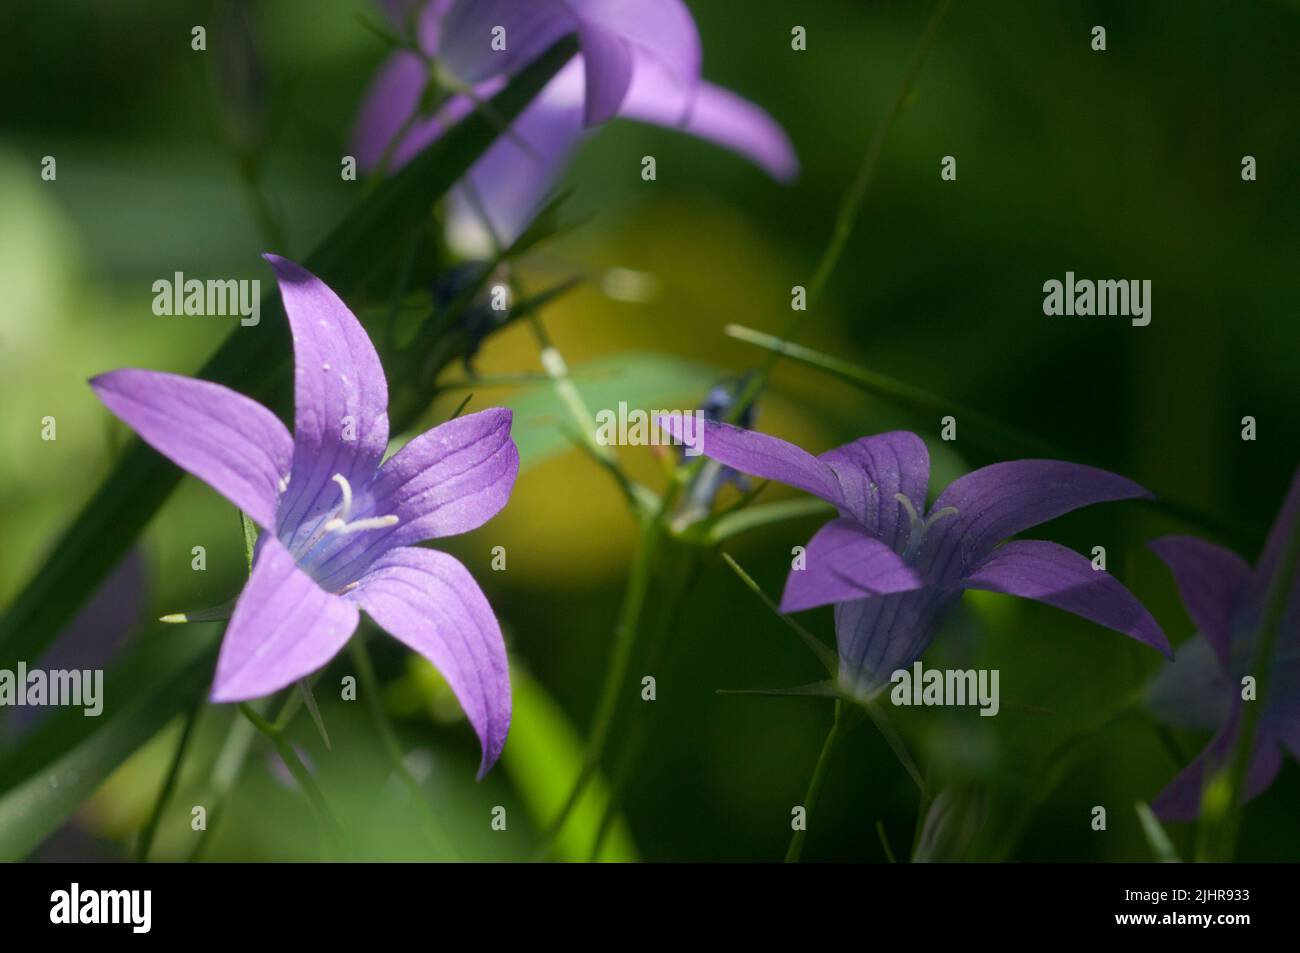 Campanula patula (spreading bellflower) flowers in a grass, close up shot, local focus Stock Photo